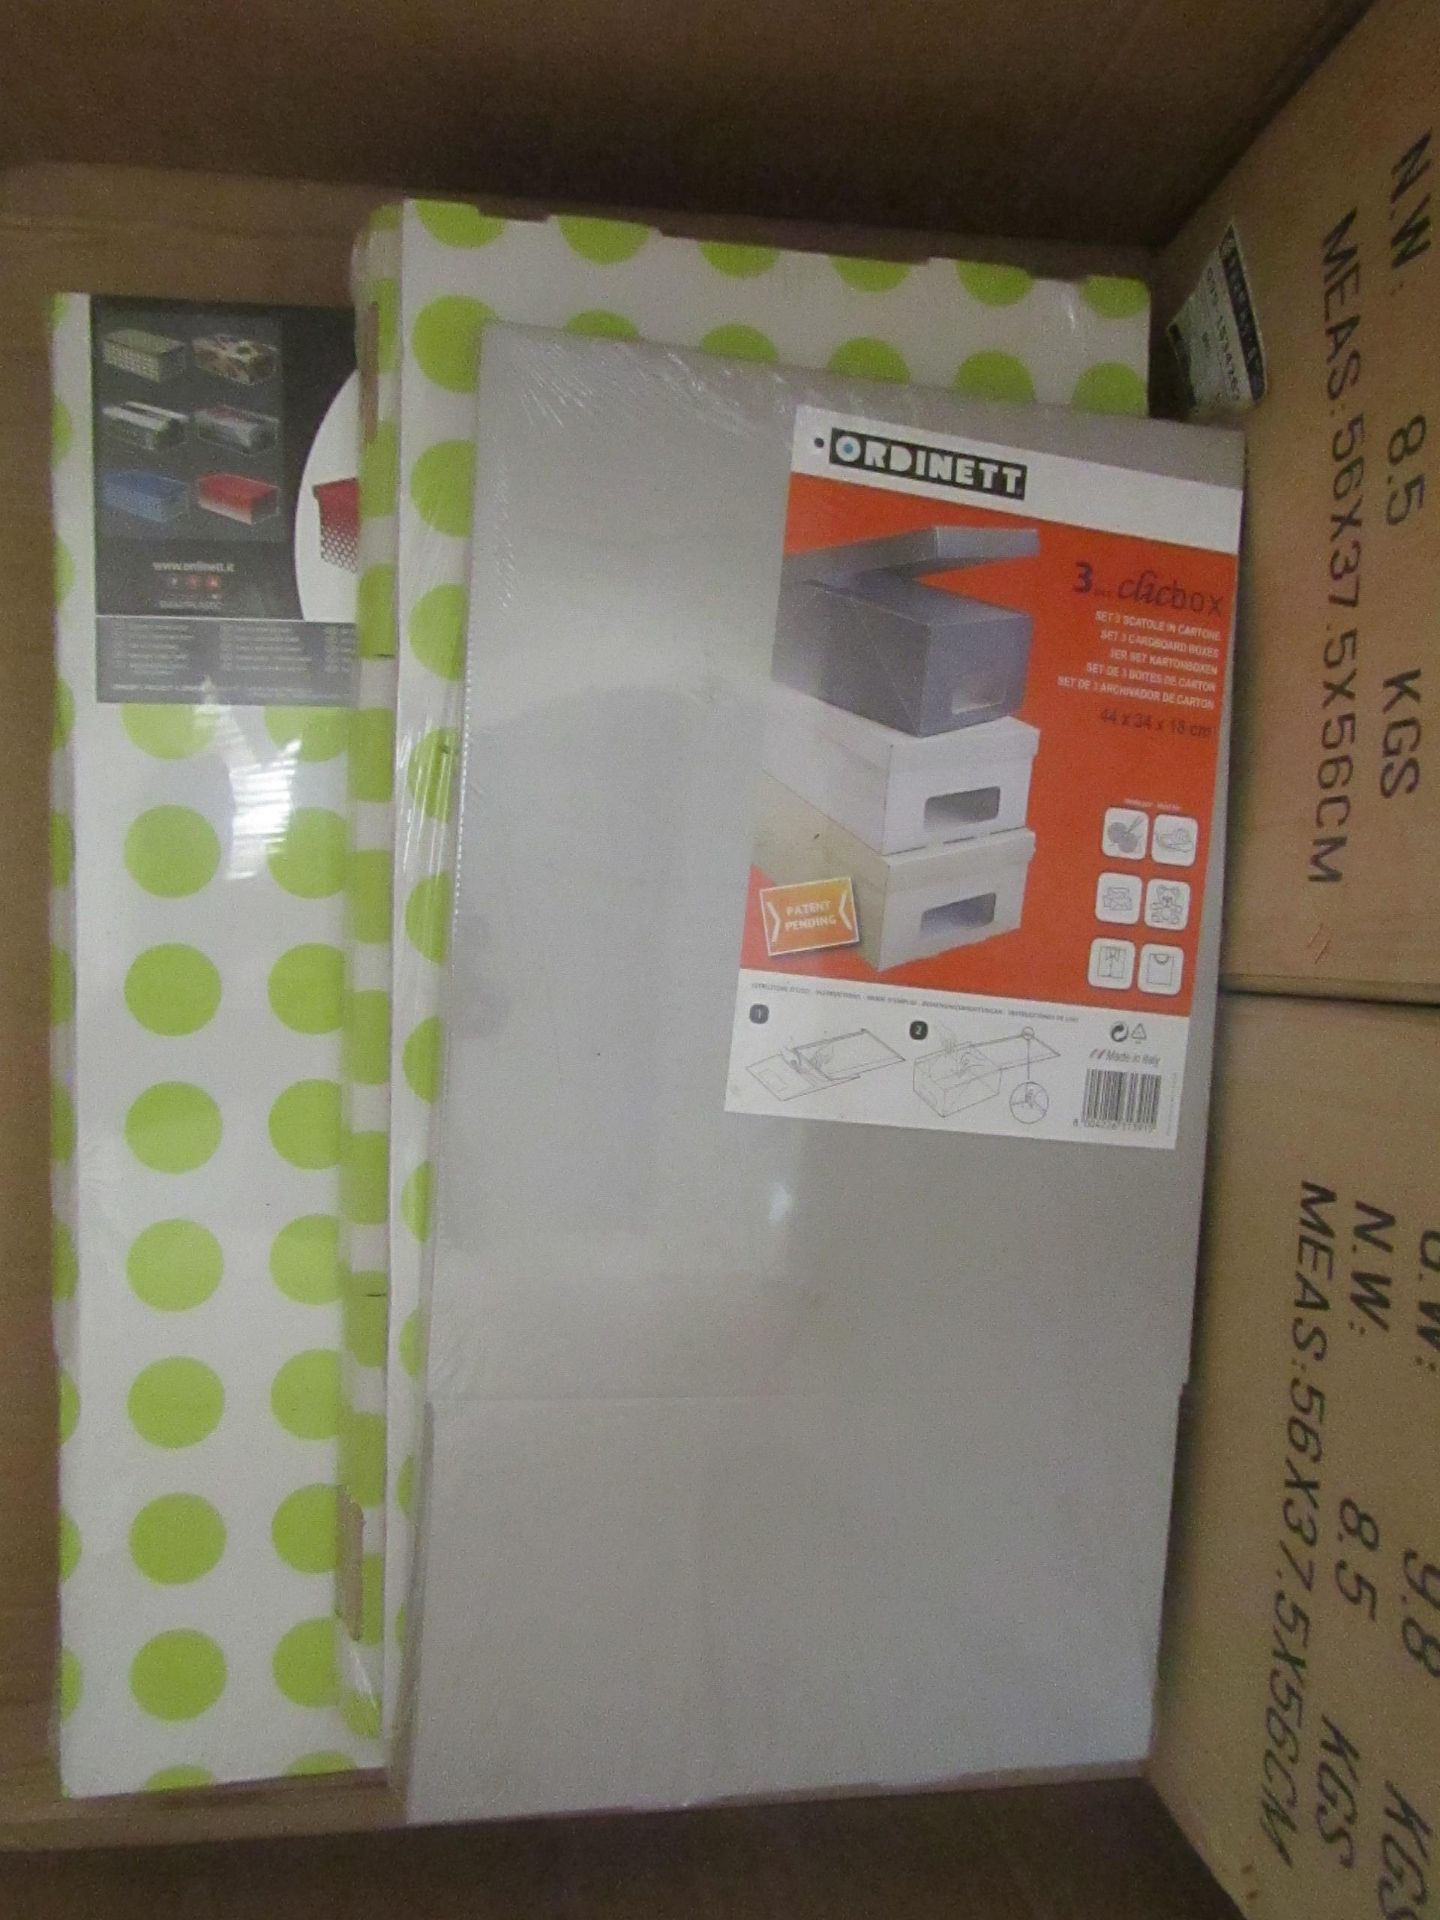 5x Ordinett 3pc Clicbox cardboardm boxes, picked at random - New & Packaged.